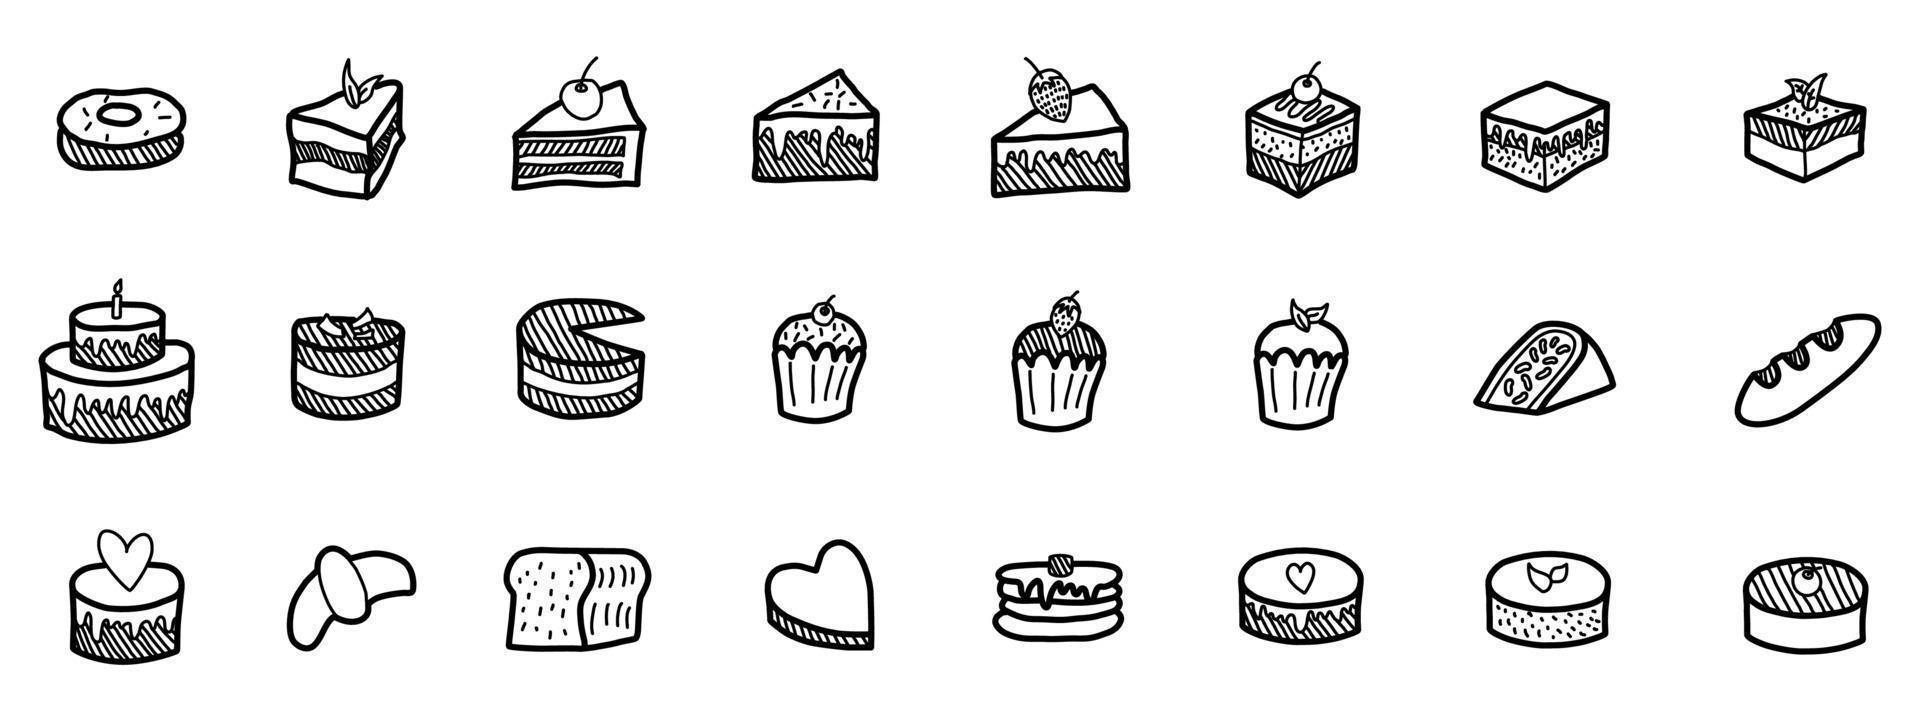 Handdrawn style sweet and cake icon bundles vector